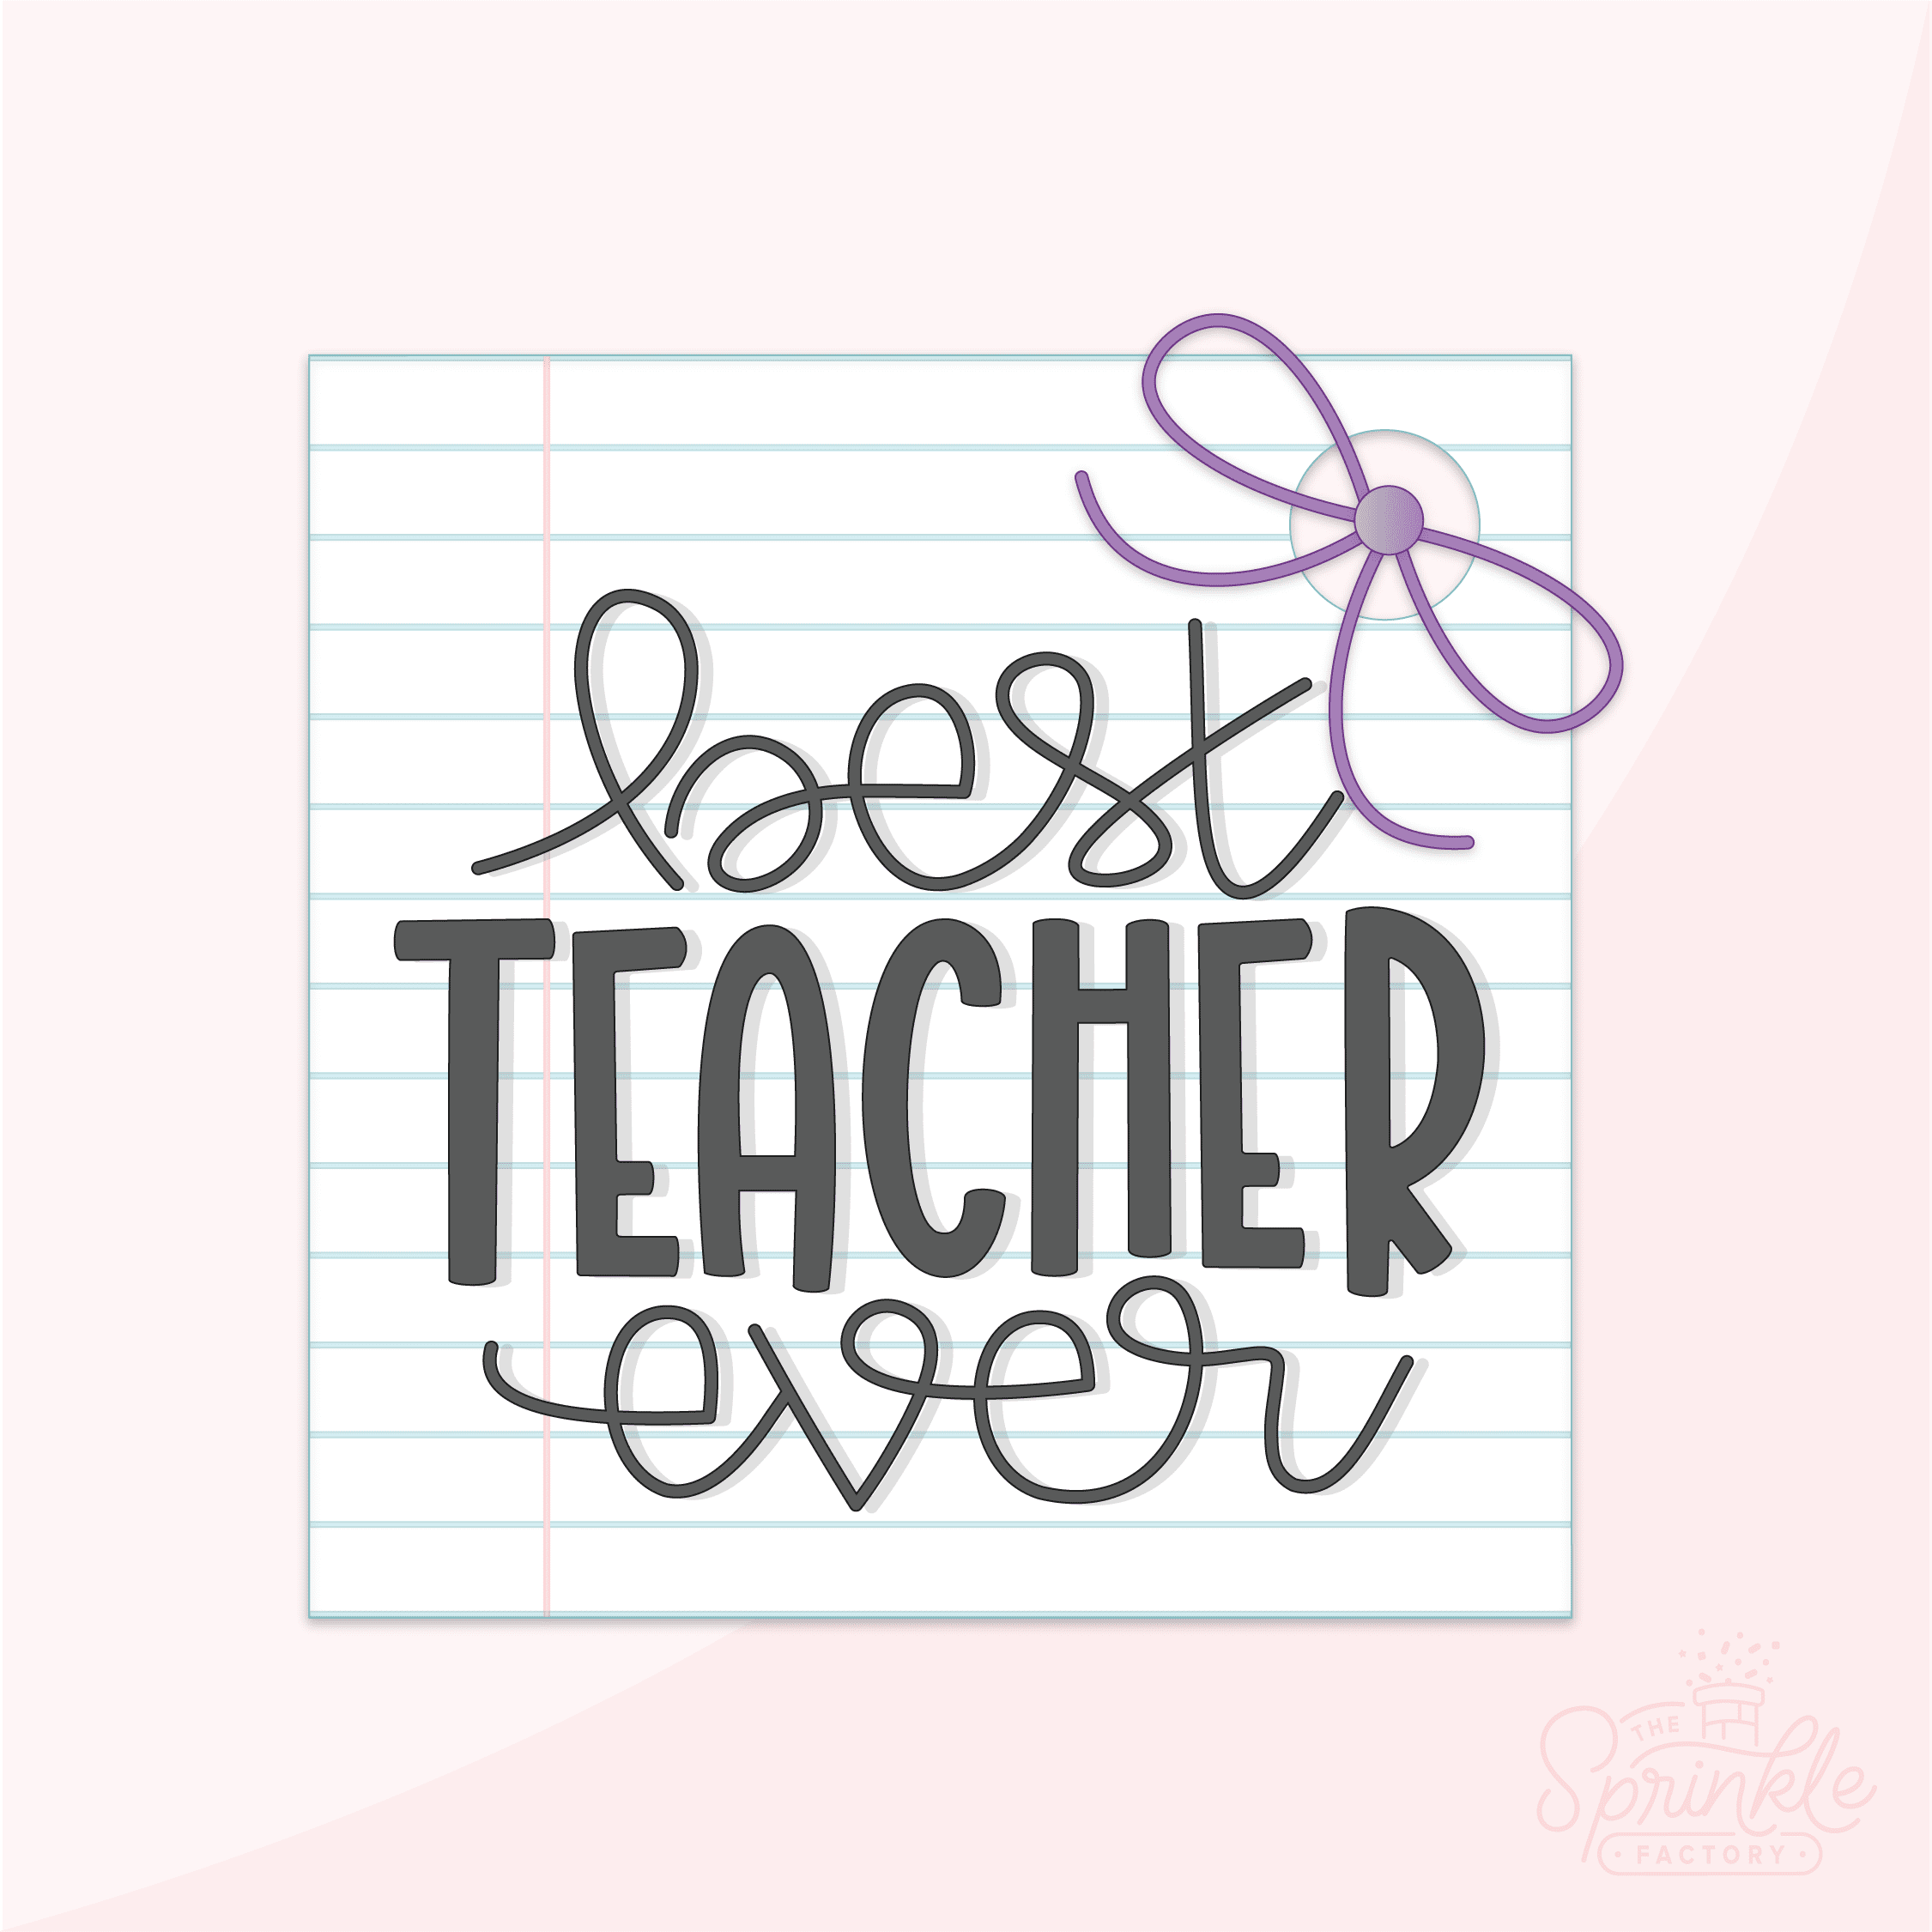 Digital image of a paper tag that says best teacher ever on notebook paper with a purple bow.